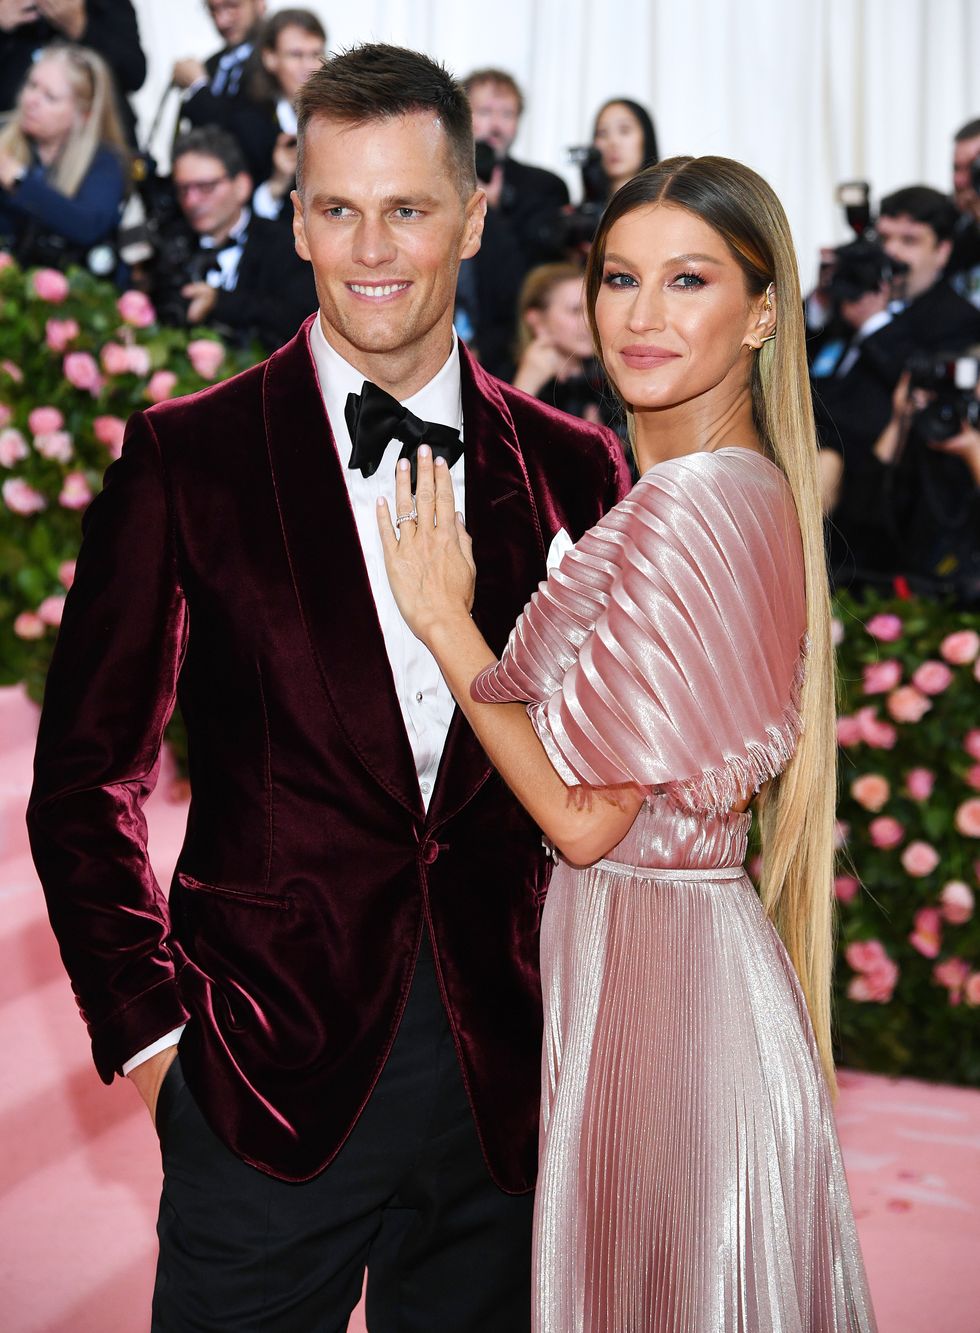 new york, new york may 06 gisele bündchen and tom brady attend the 2019 met gala celebrating camp notes on fashion at metropolitan museum of art on may 06, 2019 in new york city photo by dimitrios kambourisgetty images for the met museumvogue